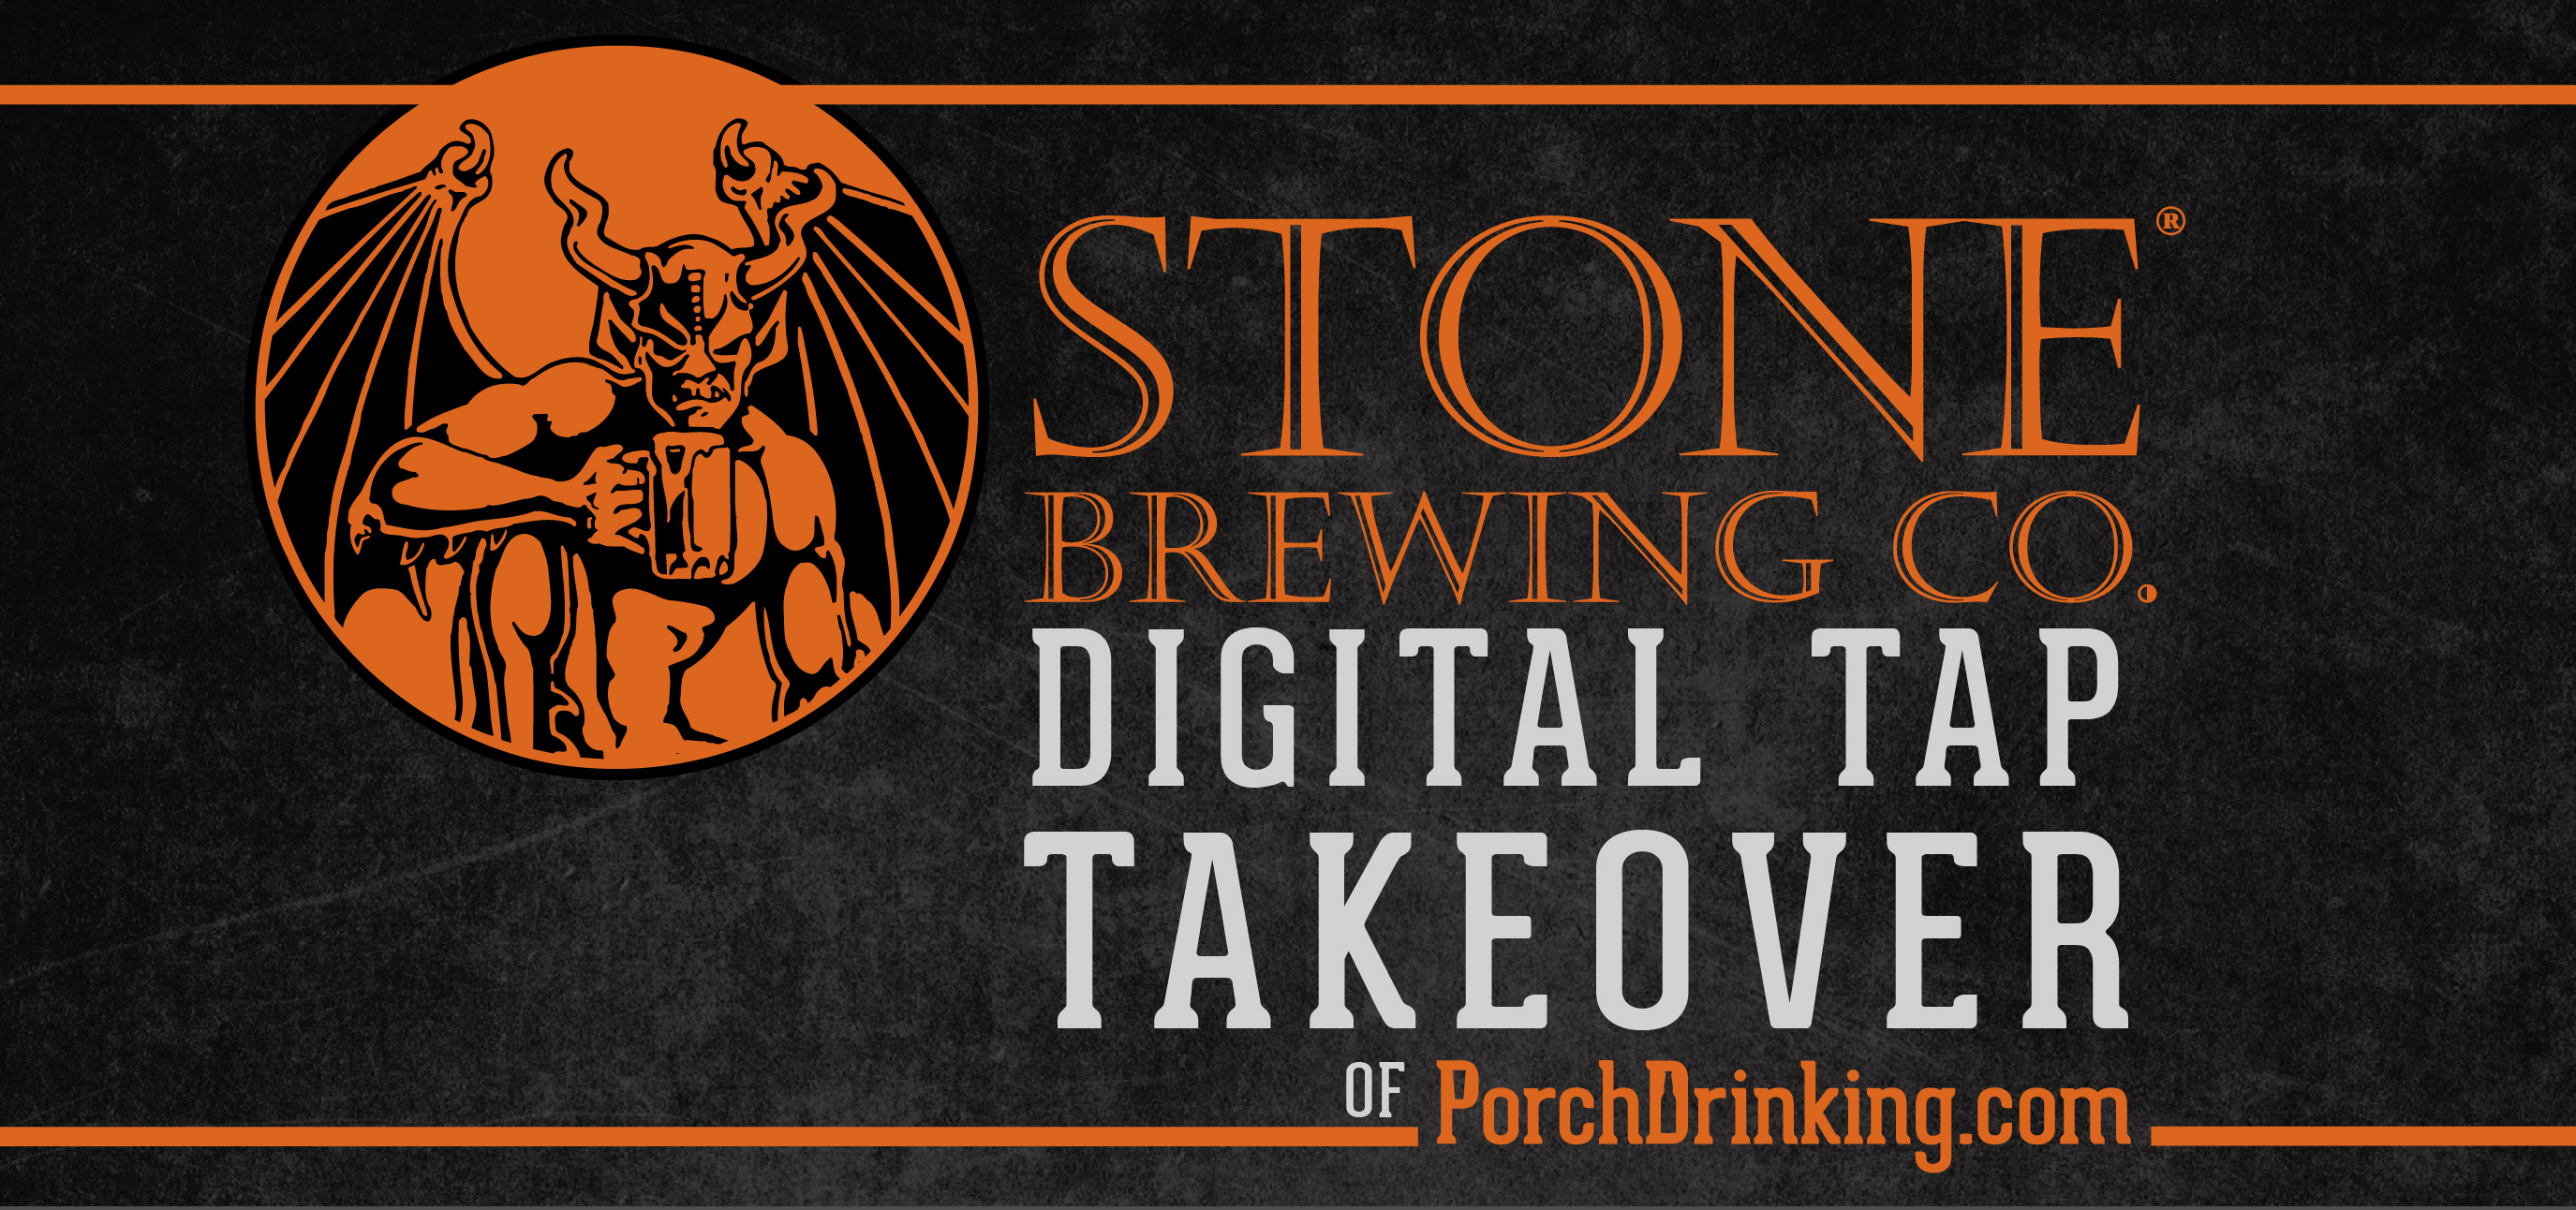 Stone Brewing Company Digital Tap Takeover